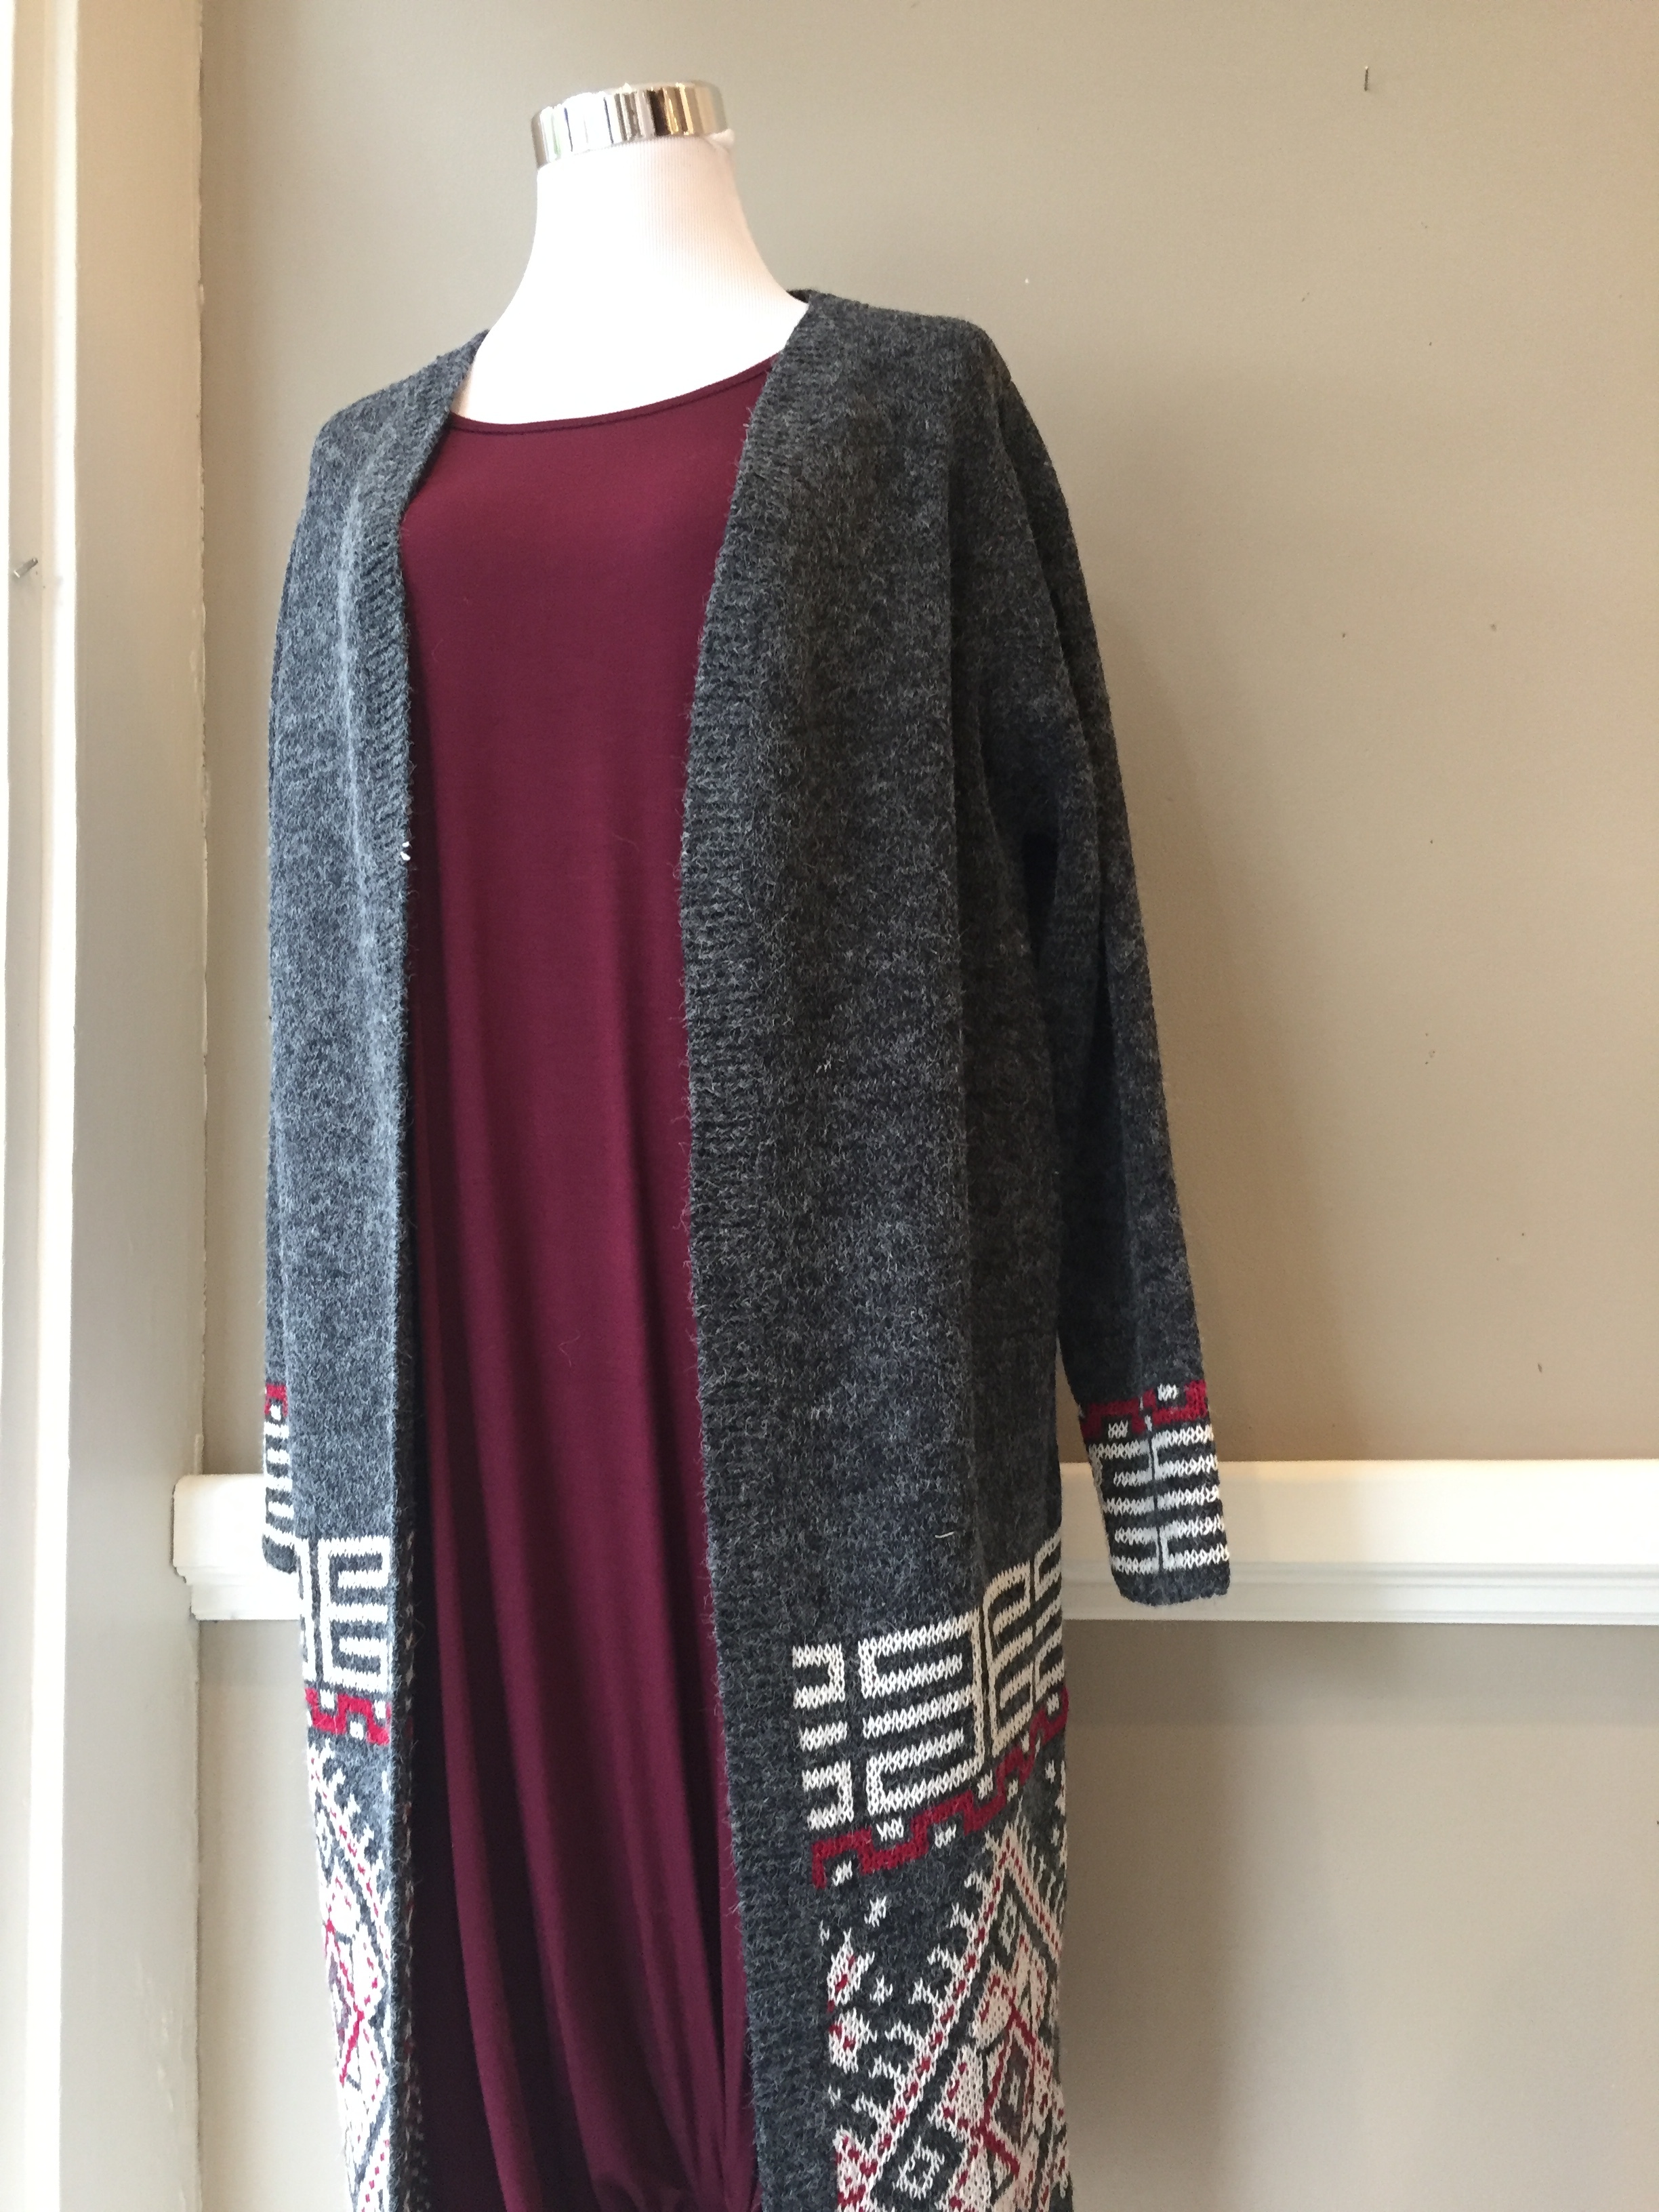 Charcoal and red duster ($45)